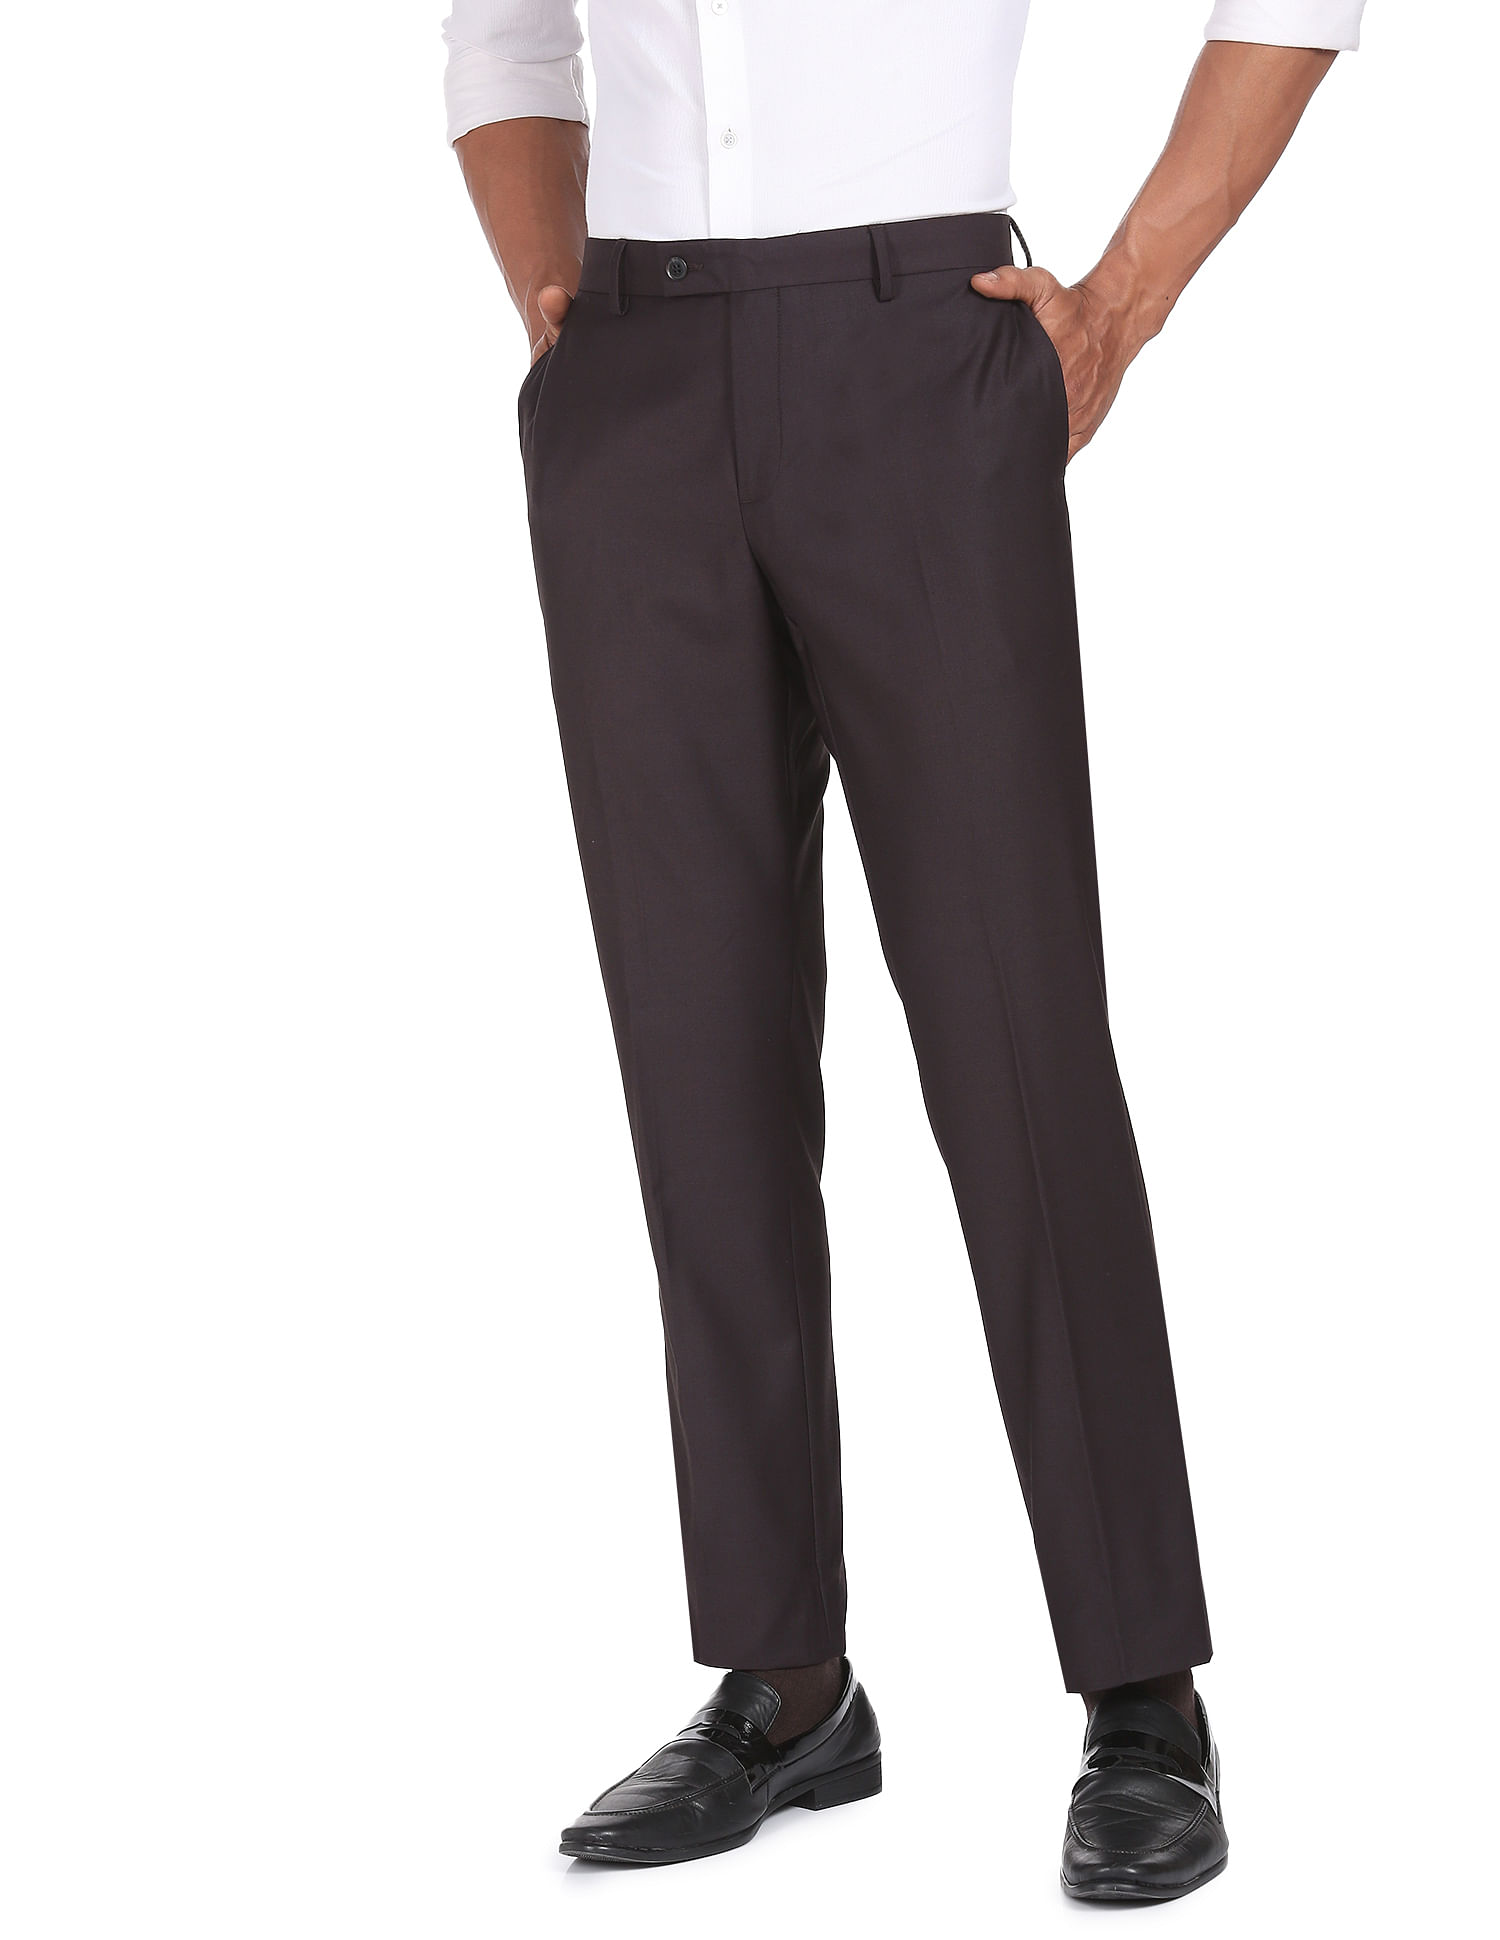 Buy Arrow Flat Front Regular Fit Formal Trousers - NNNOW.com